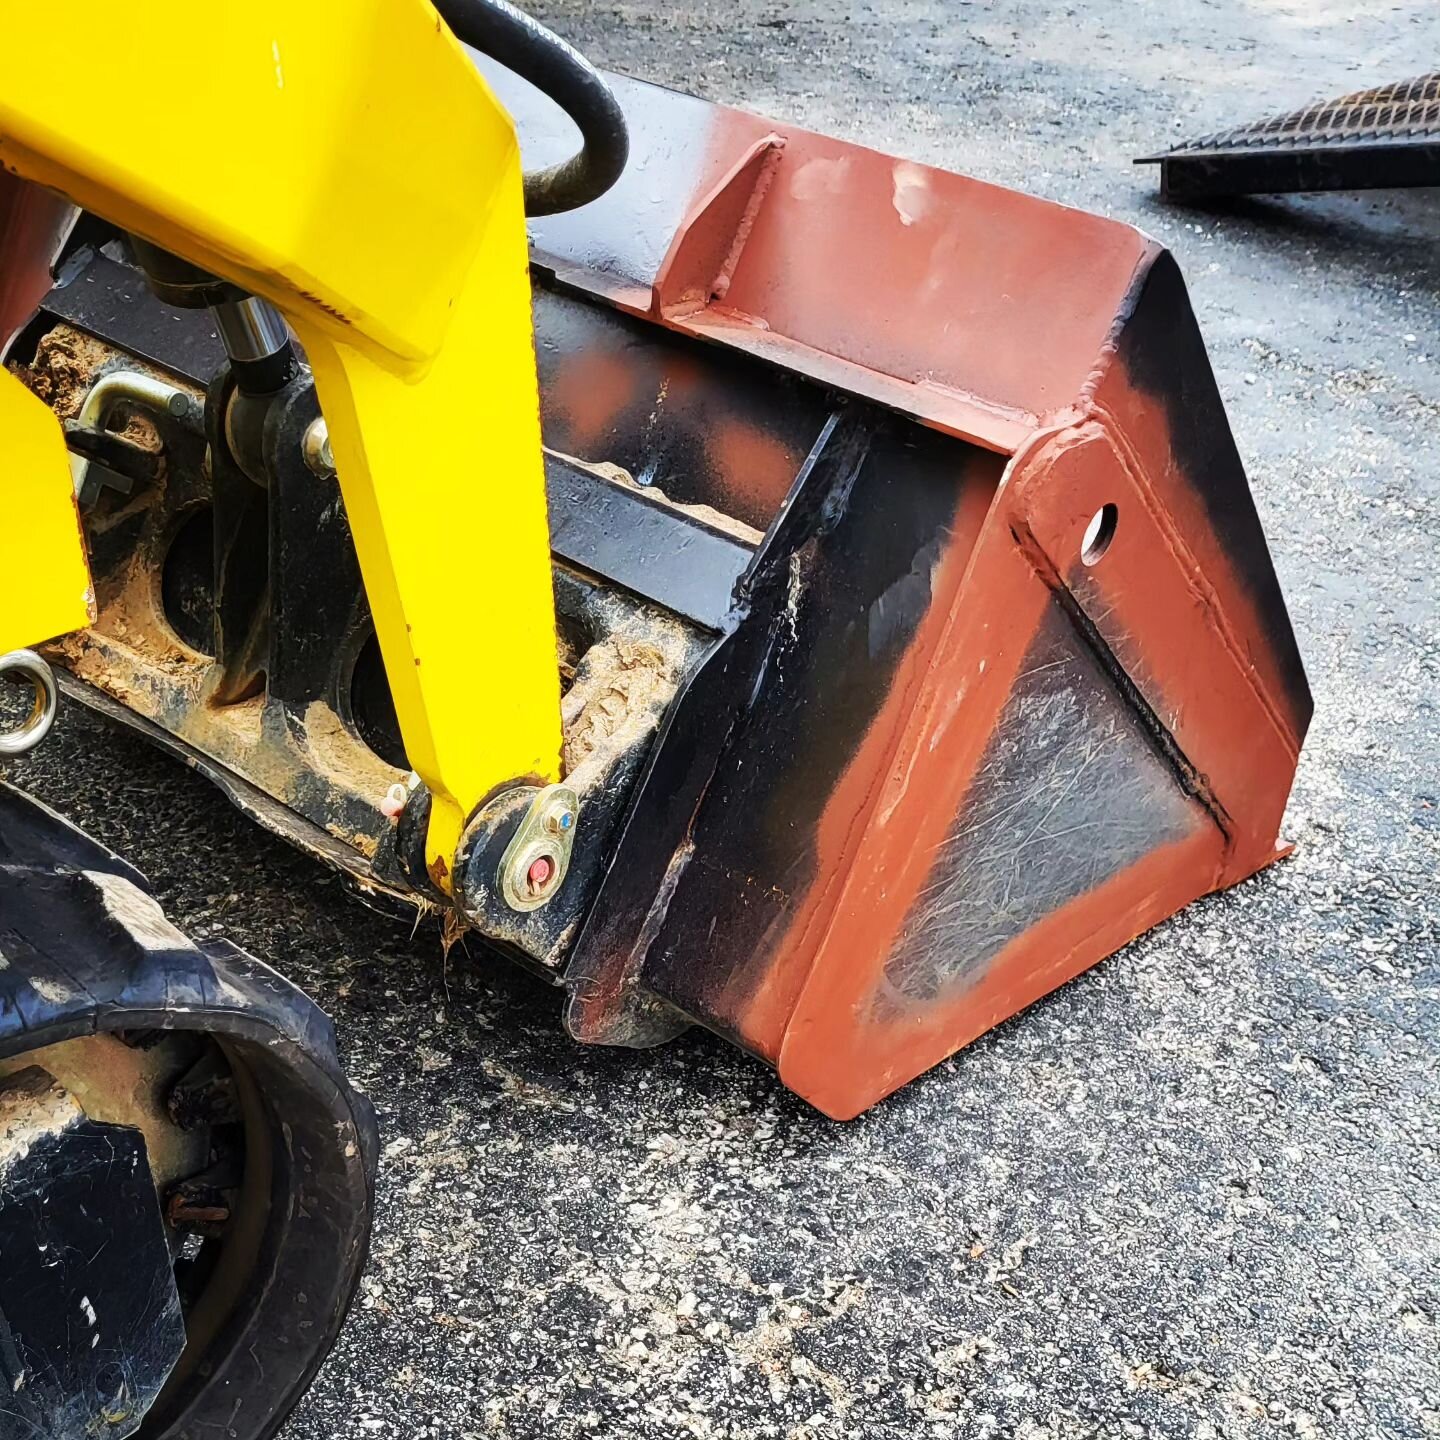 Swipe for the crispyness! Our quest to provide the customer the best price continues. Investing further into our machines to get the best results possible for everyone involved. 

This bucket was refabricated to reduce the width yet increase the volu